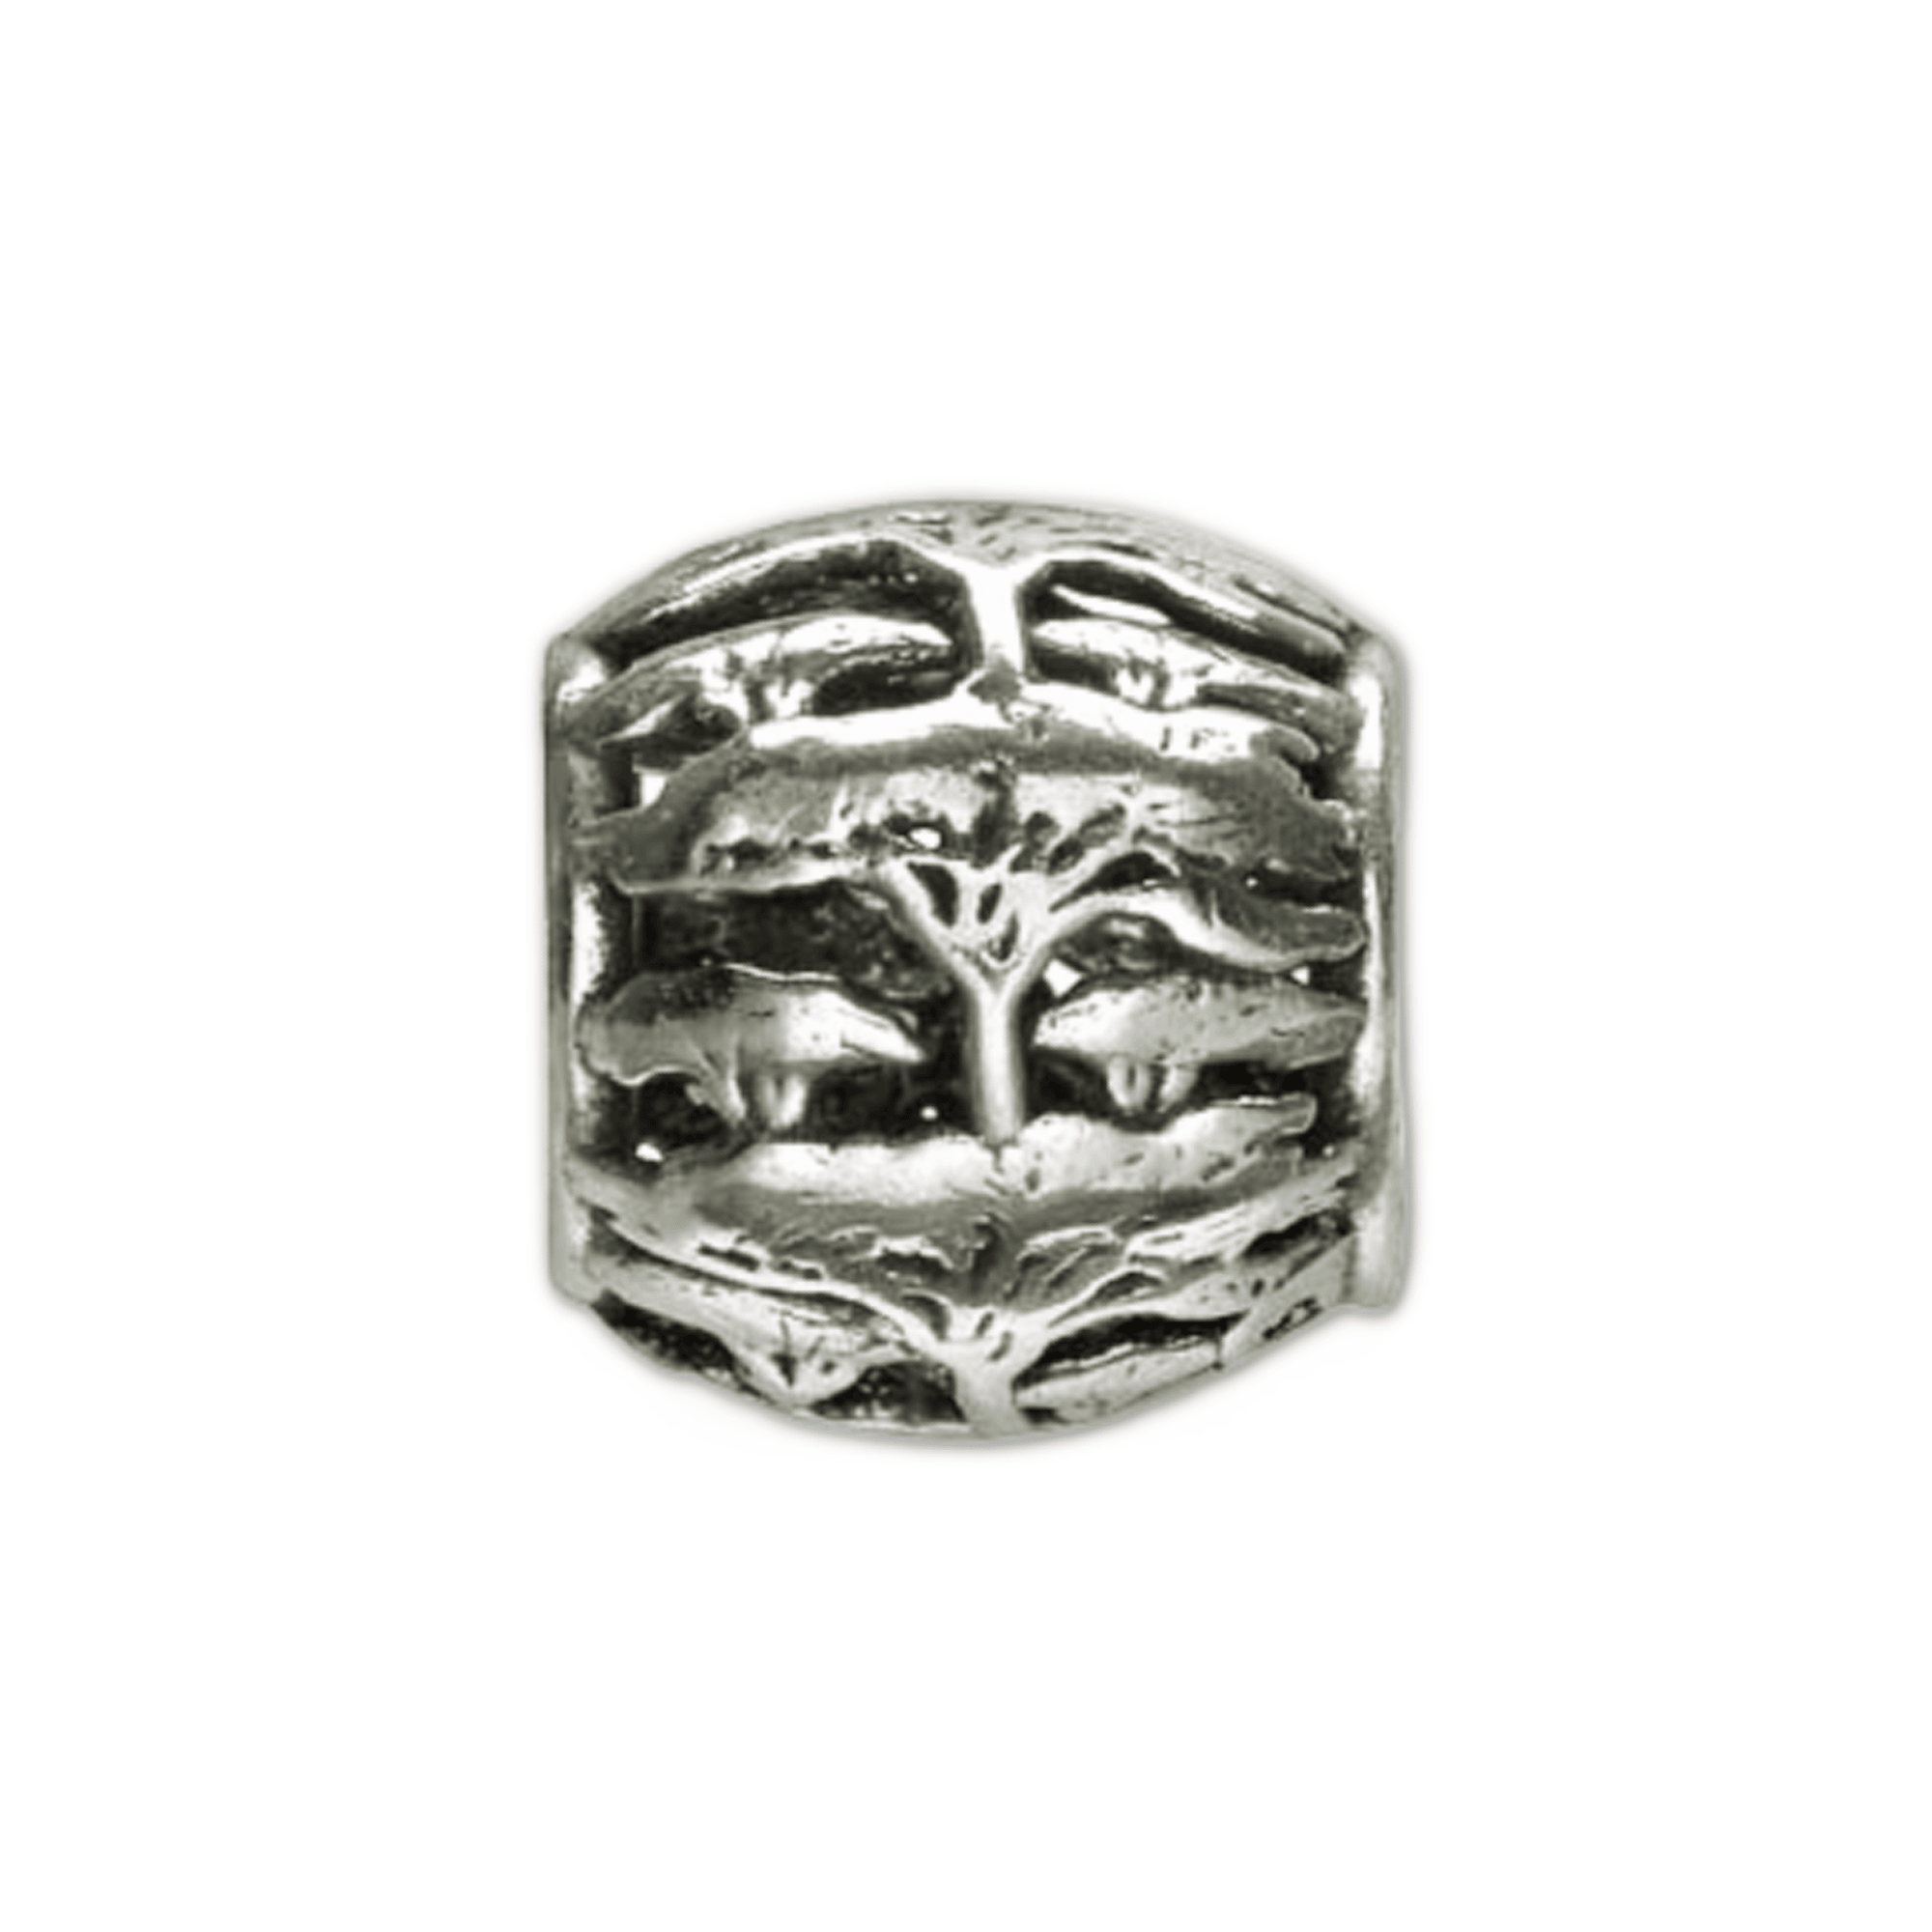 Military Jewelry, Military Charms, Military Gifts, Travel Charms, Serengeti Tree Spacer/Bead